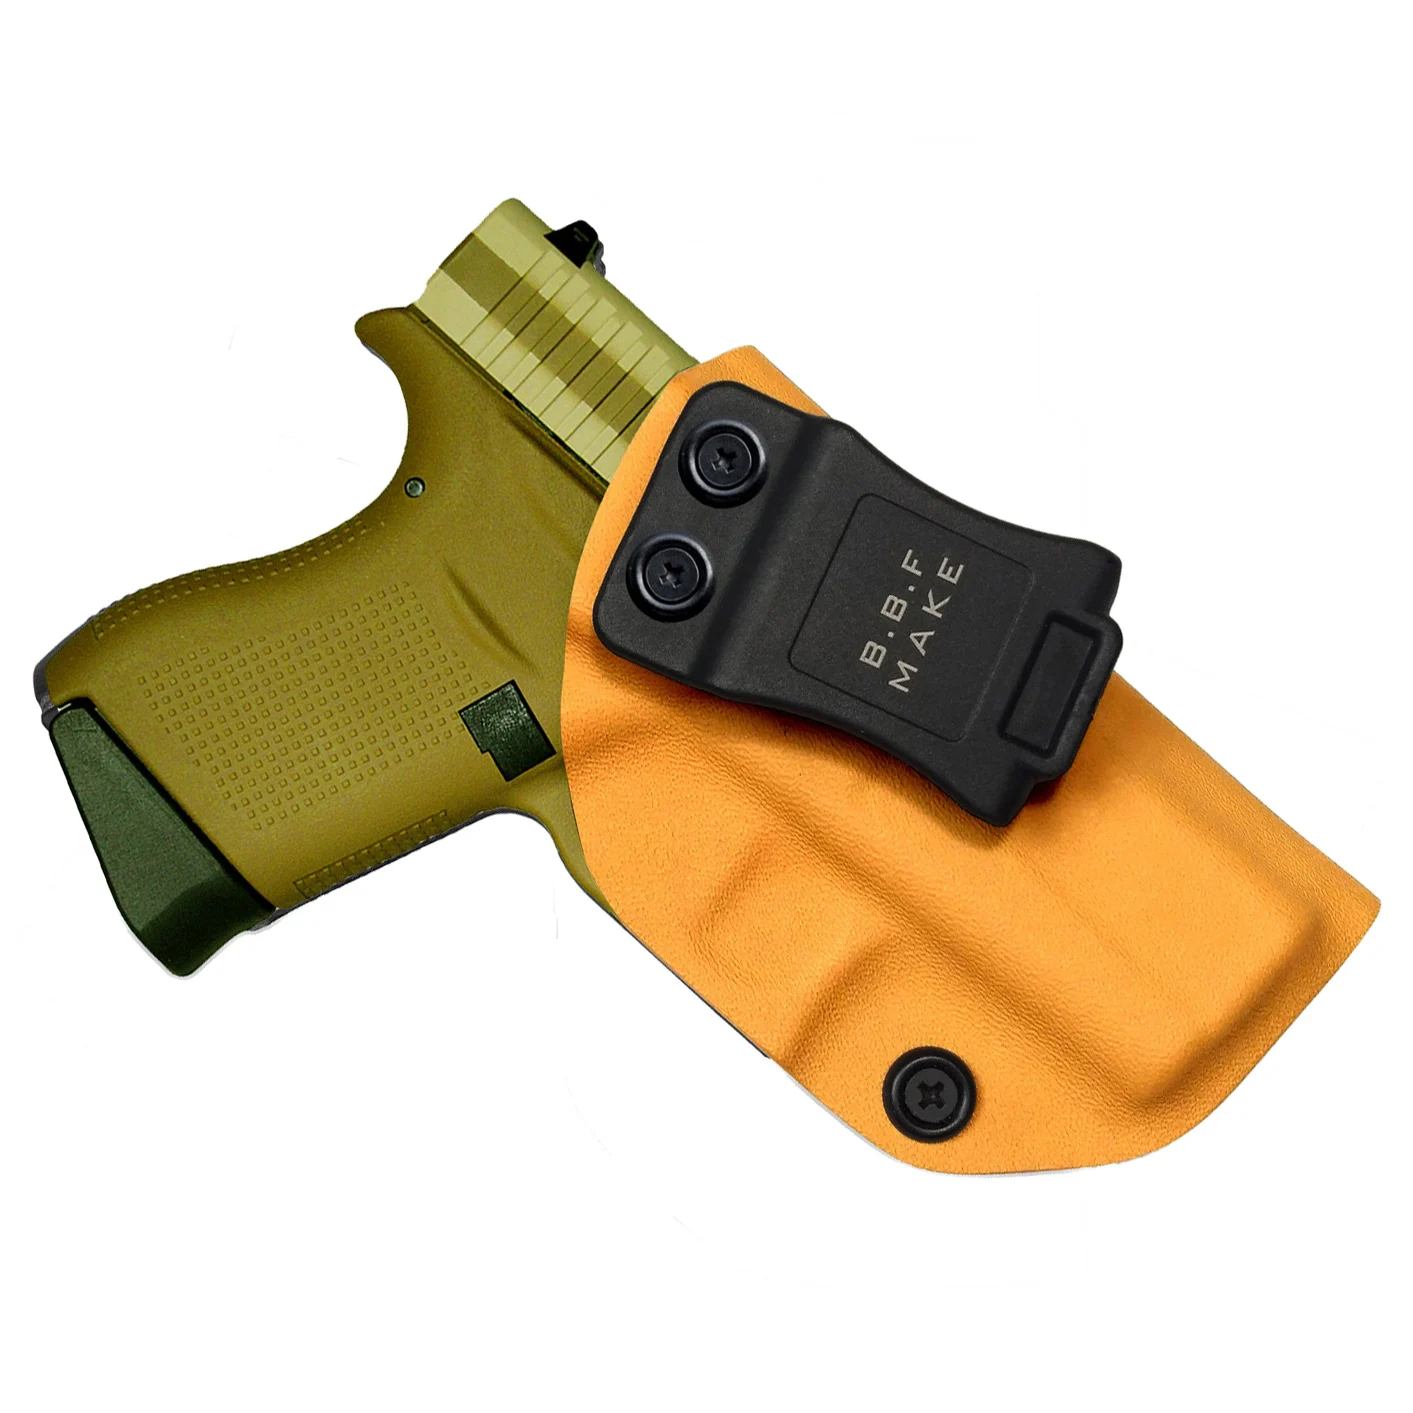 B.b.f Iwb Kydex Holster Fits: Glock 43/43x Gun Holster Inside Concealed Carrier Pistol Case Bag Accessories Tan - Buy Holster,Gun Accessories Product on Alibaba.com